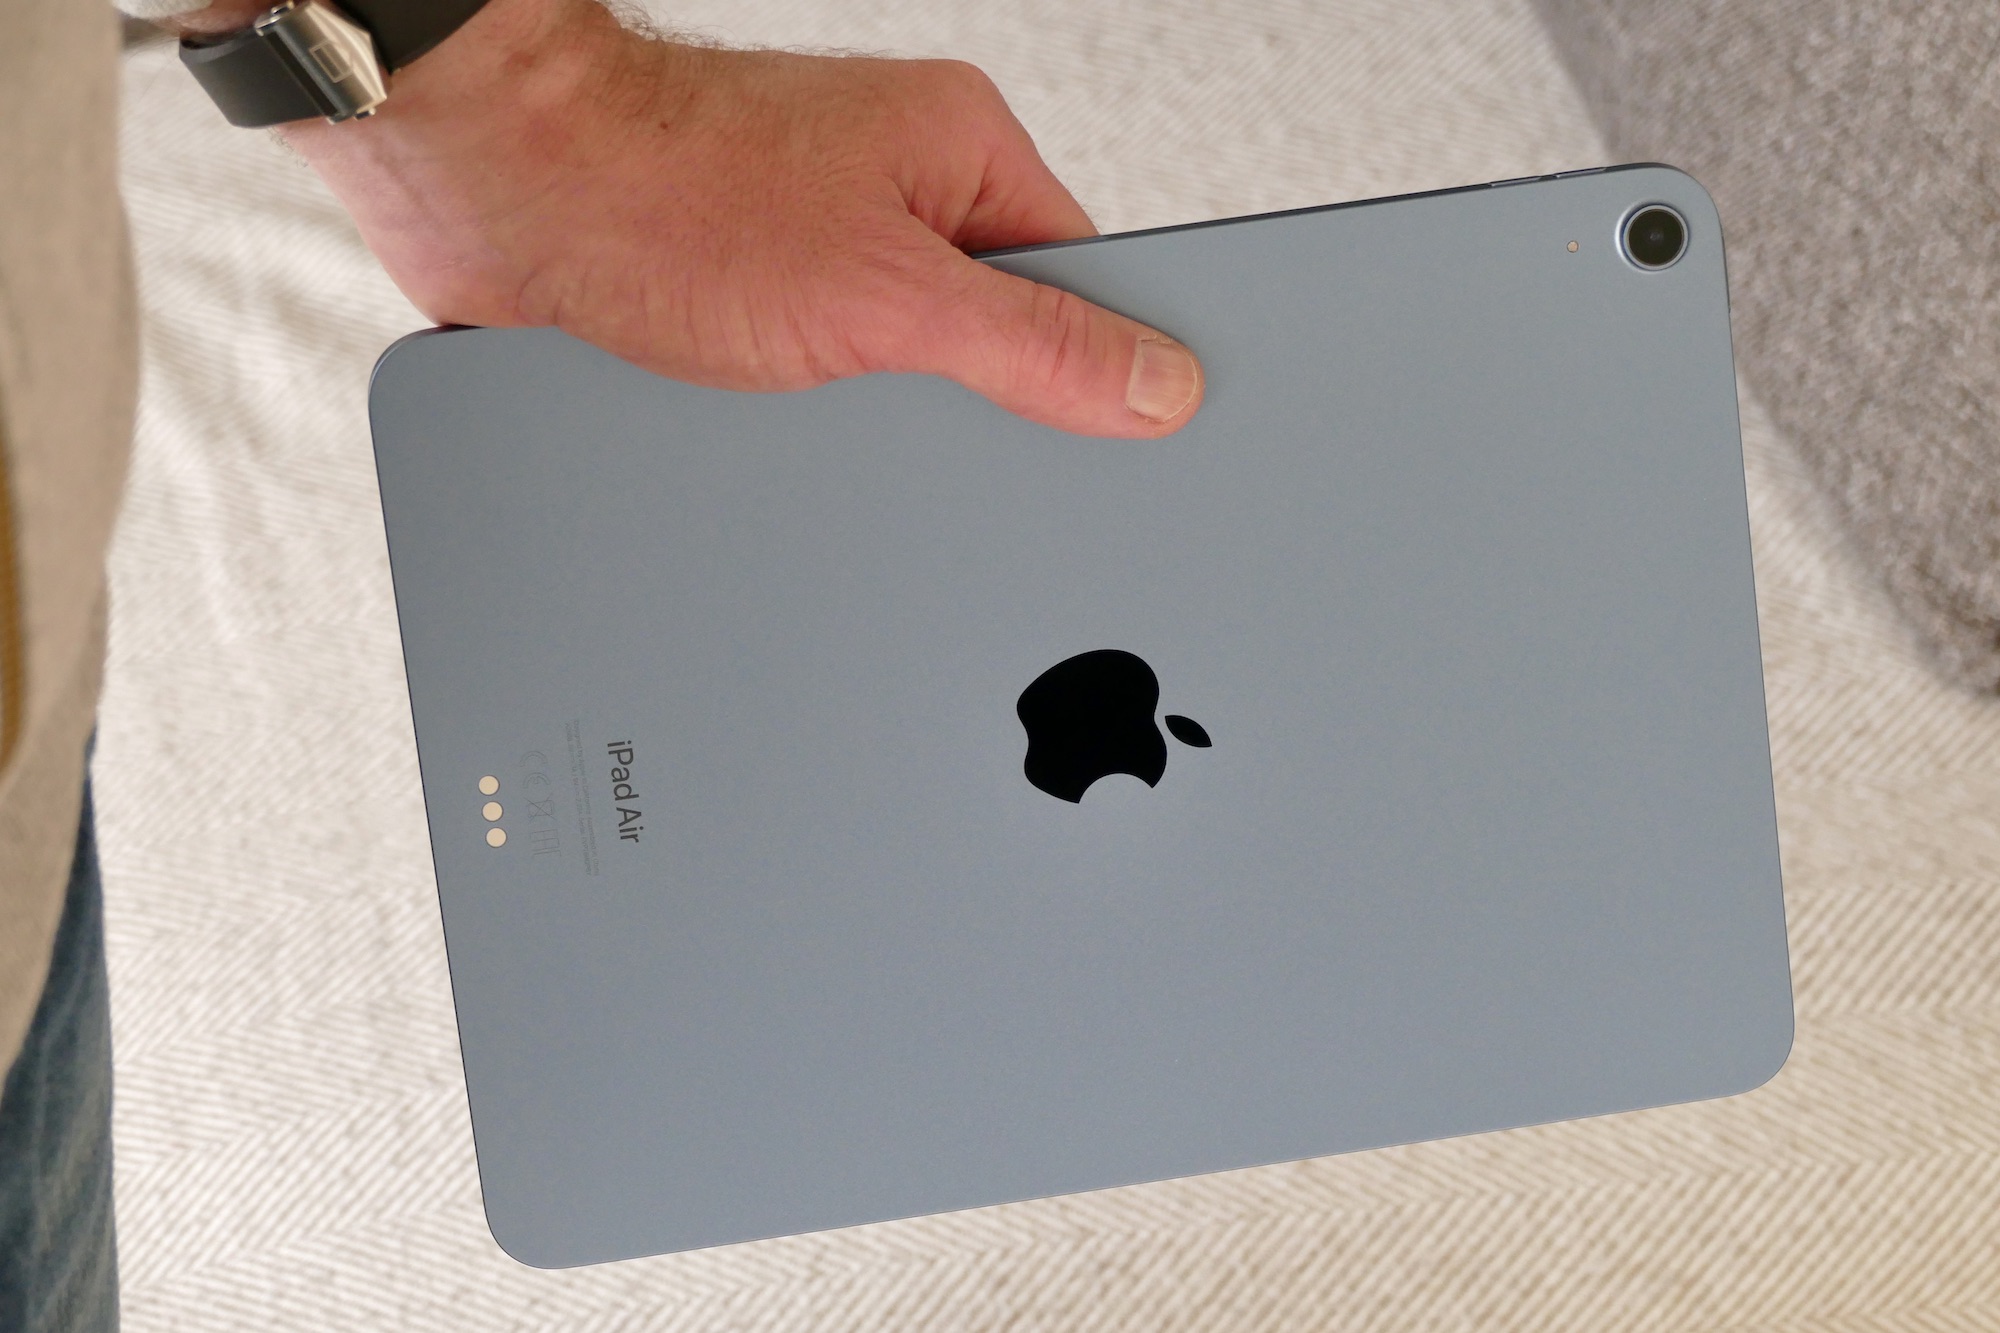 iPad Air 5 seen from the back and held in hand.